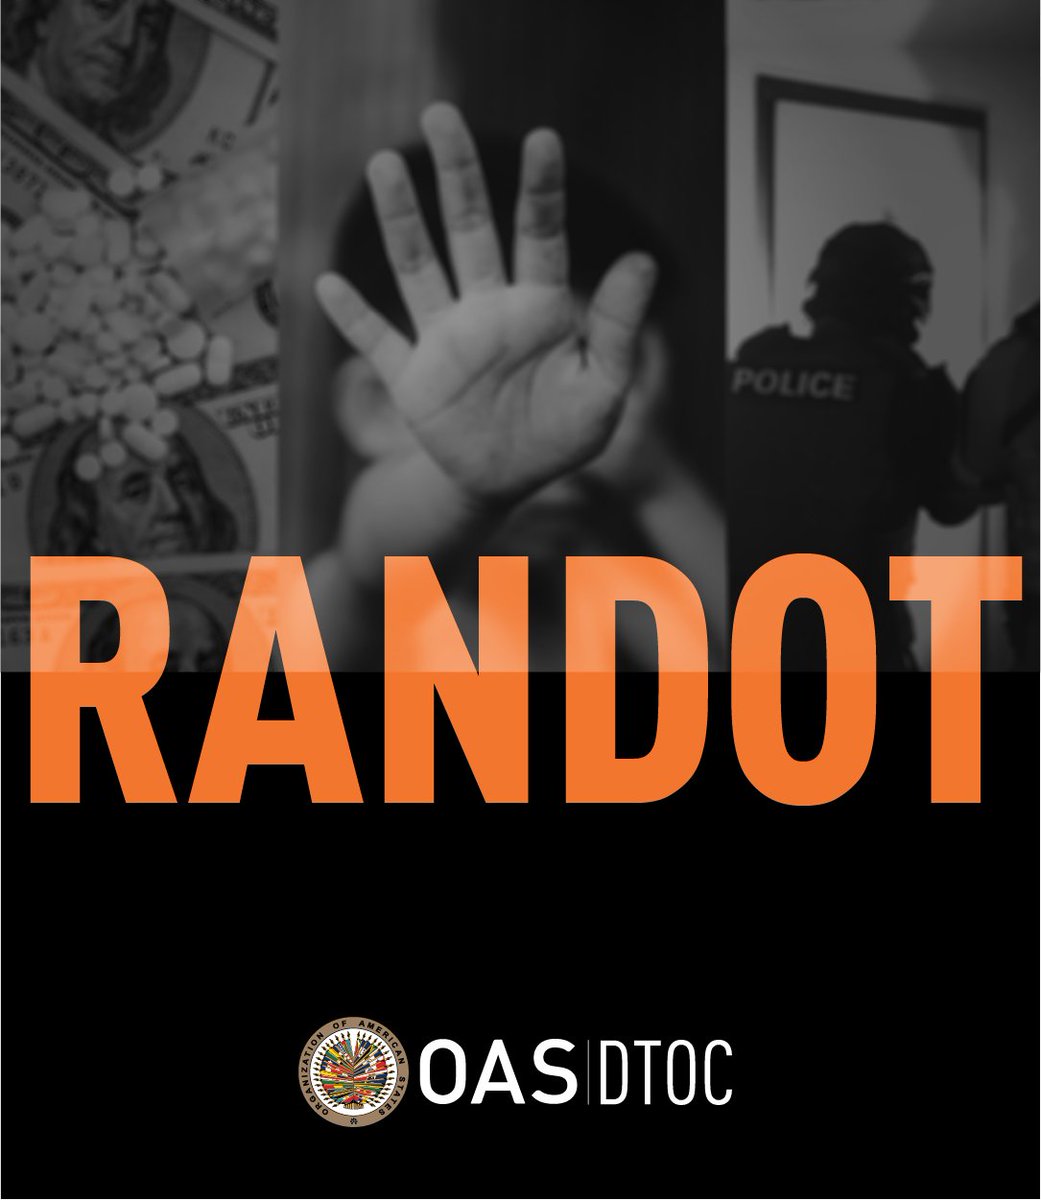 In 3 weeks, the National Authorities meet for a substantive discussion on #TransnationalOrganizedCrime because regional cooperation is essential to hemispheric security. #RANDOT4 #OAS